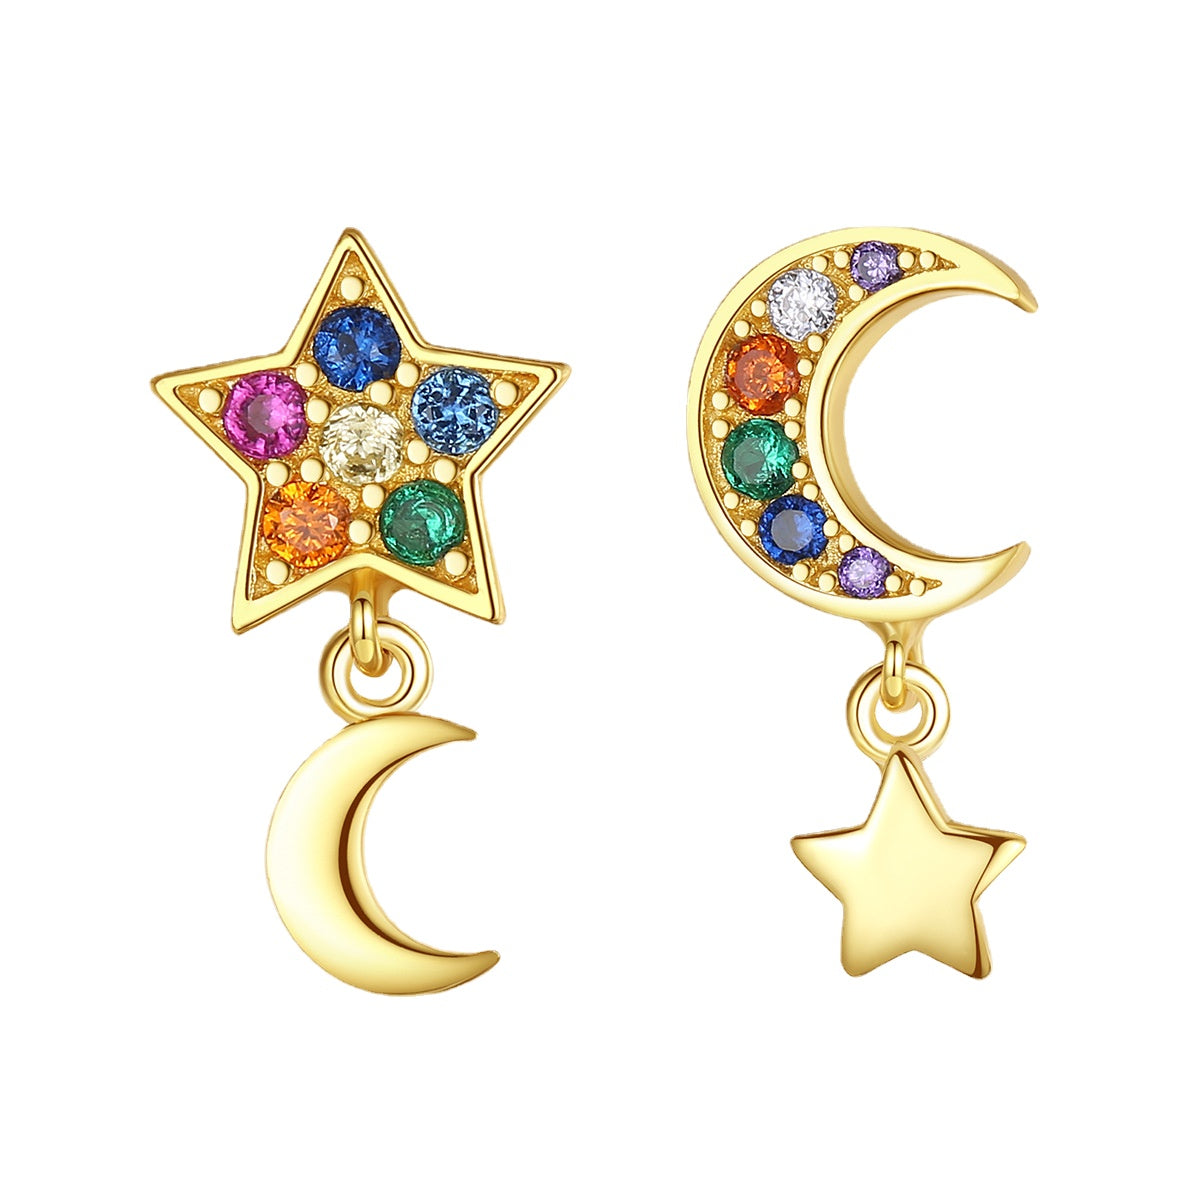 Gemstonely-Charming S925 Silver Asymmetric Star and Moon Earrings - Colorful Zirconia Ear Studs